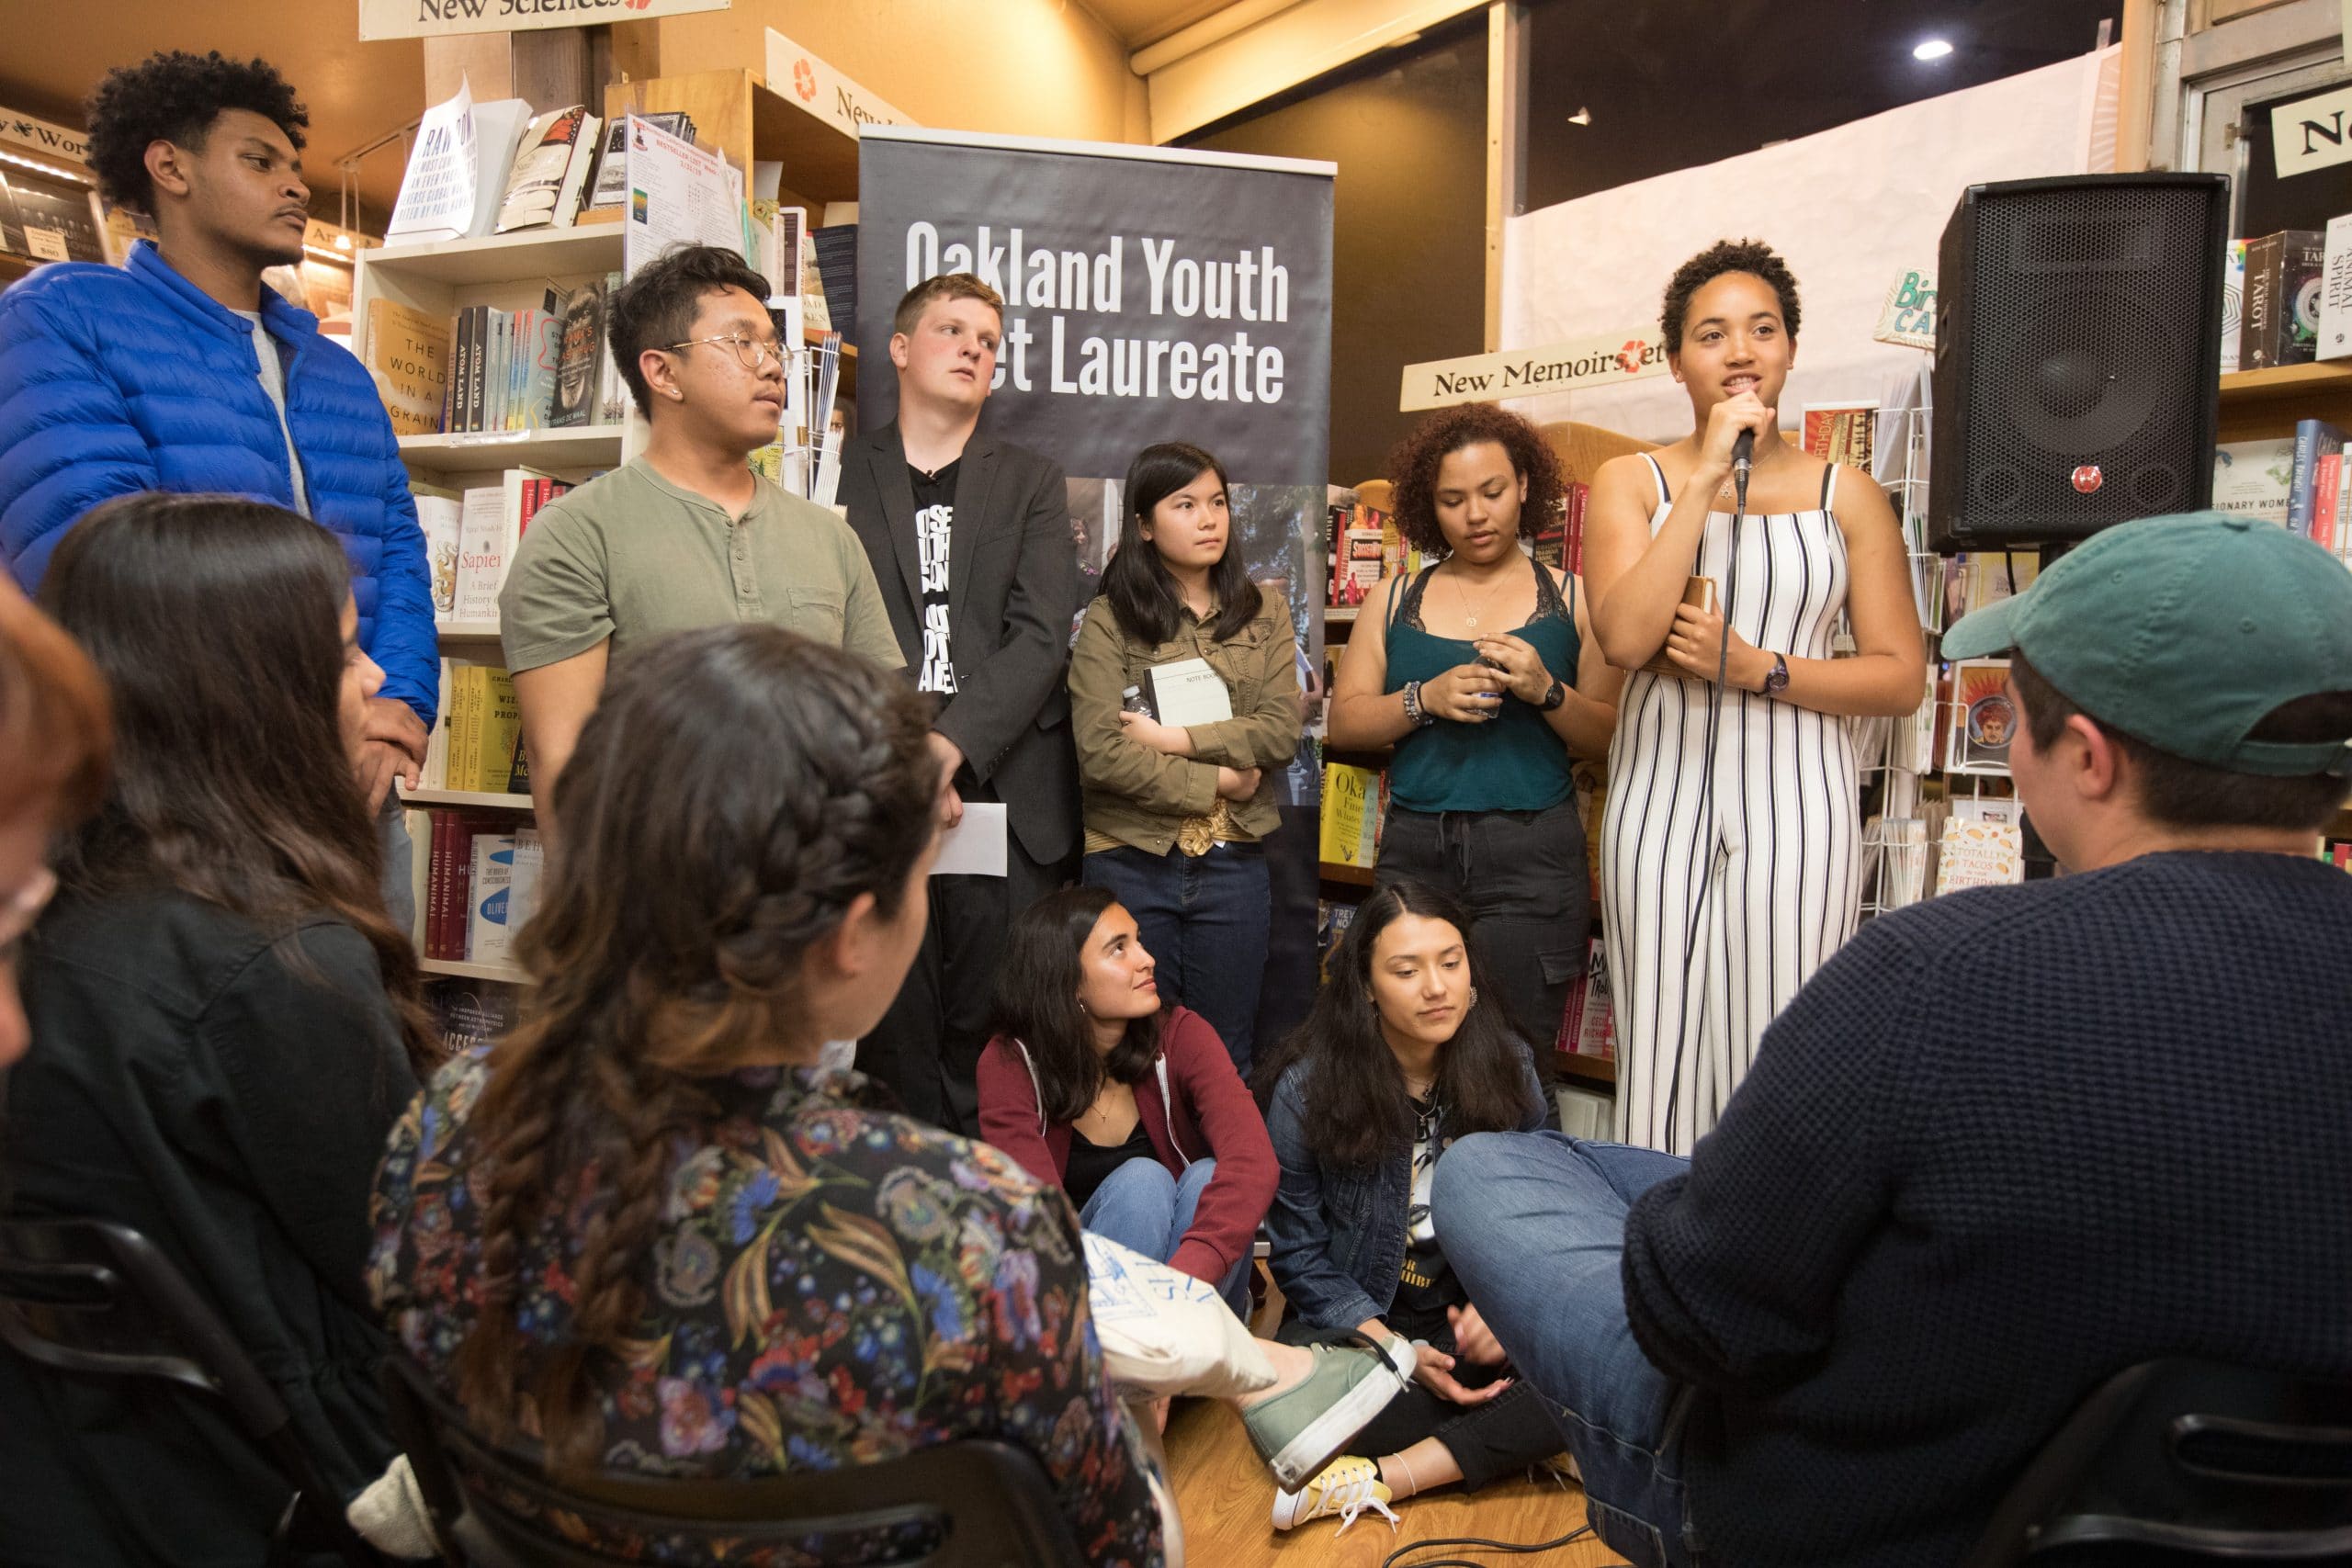 This year's finalists for the Oakland Youth Poet Laureate perform, with their judges, at Pegasus Books on College Ave in Oakland on April 19, 2019.